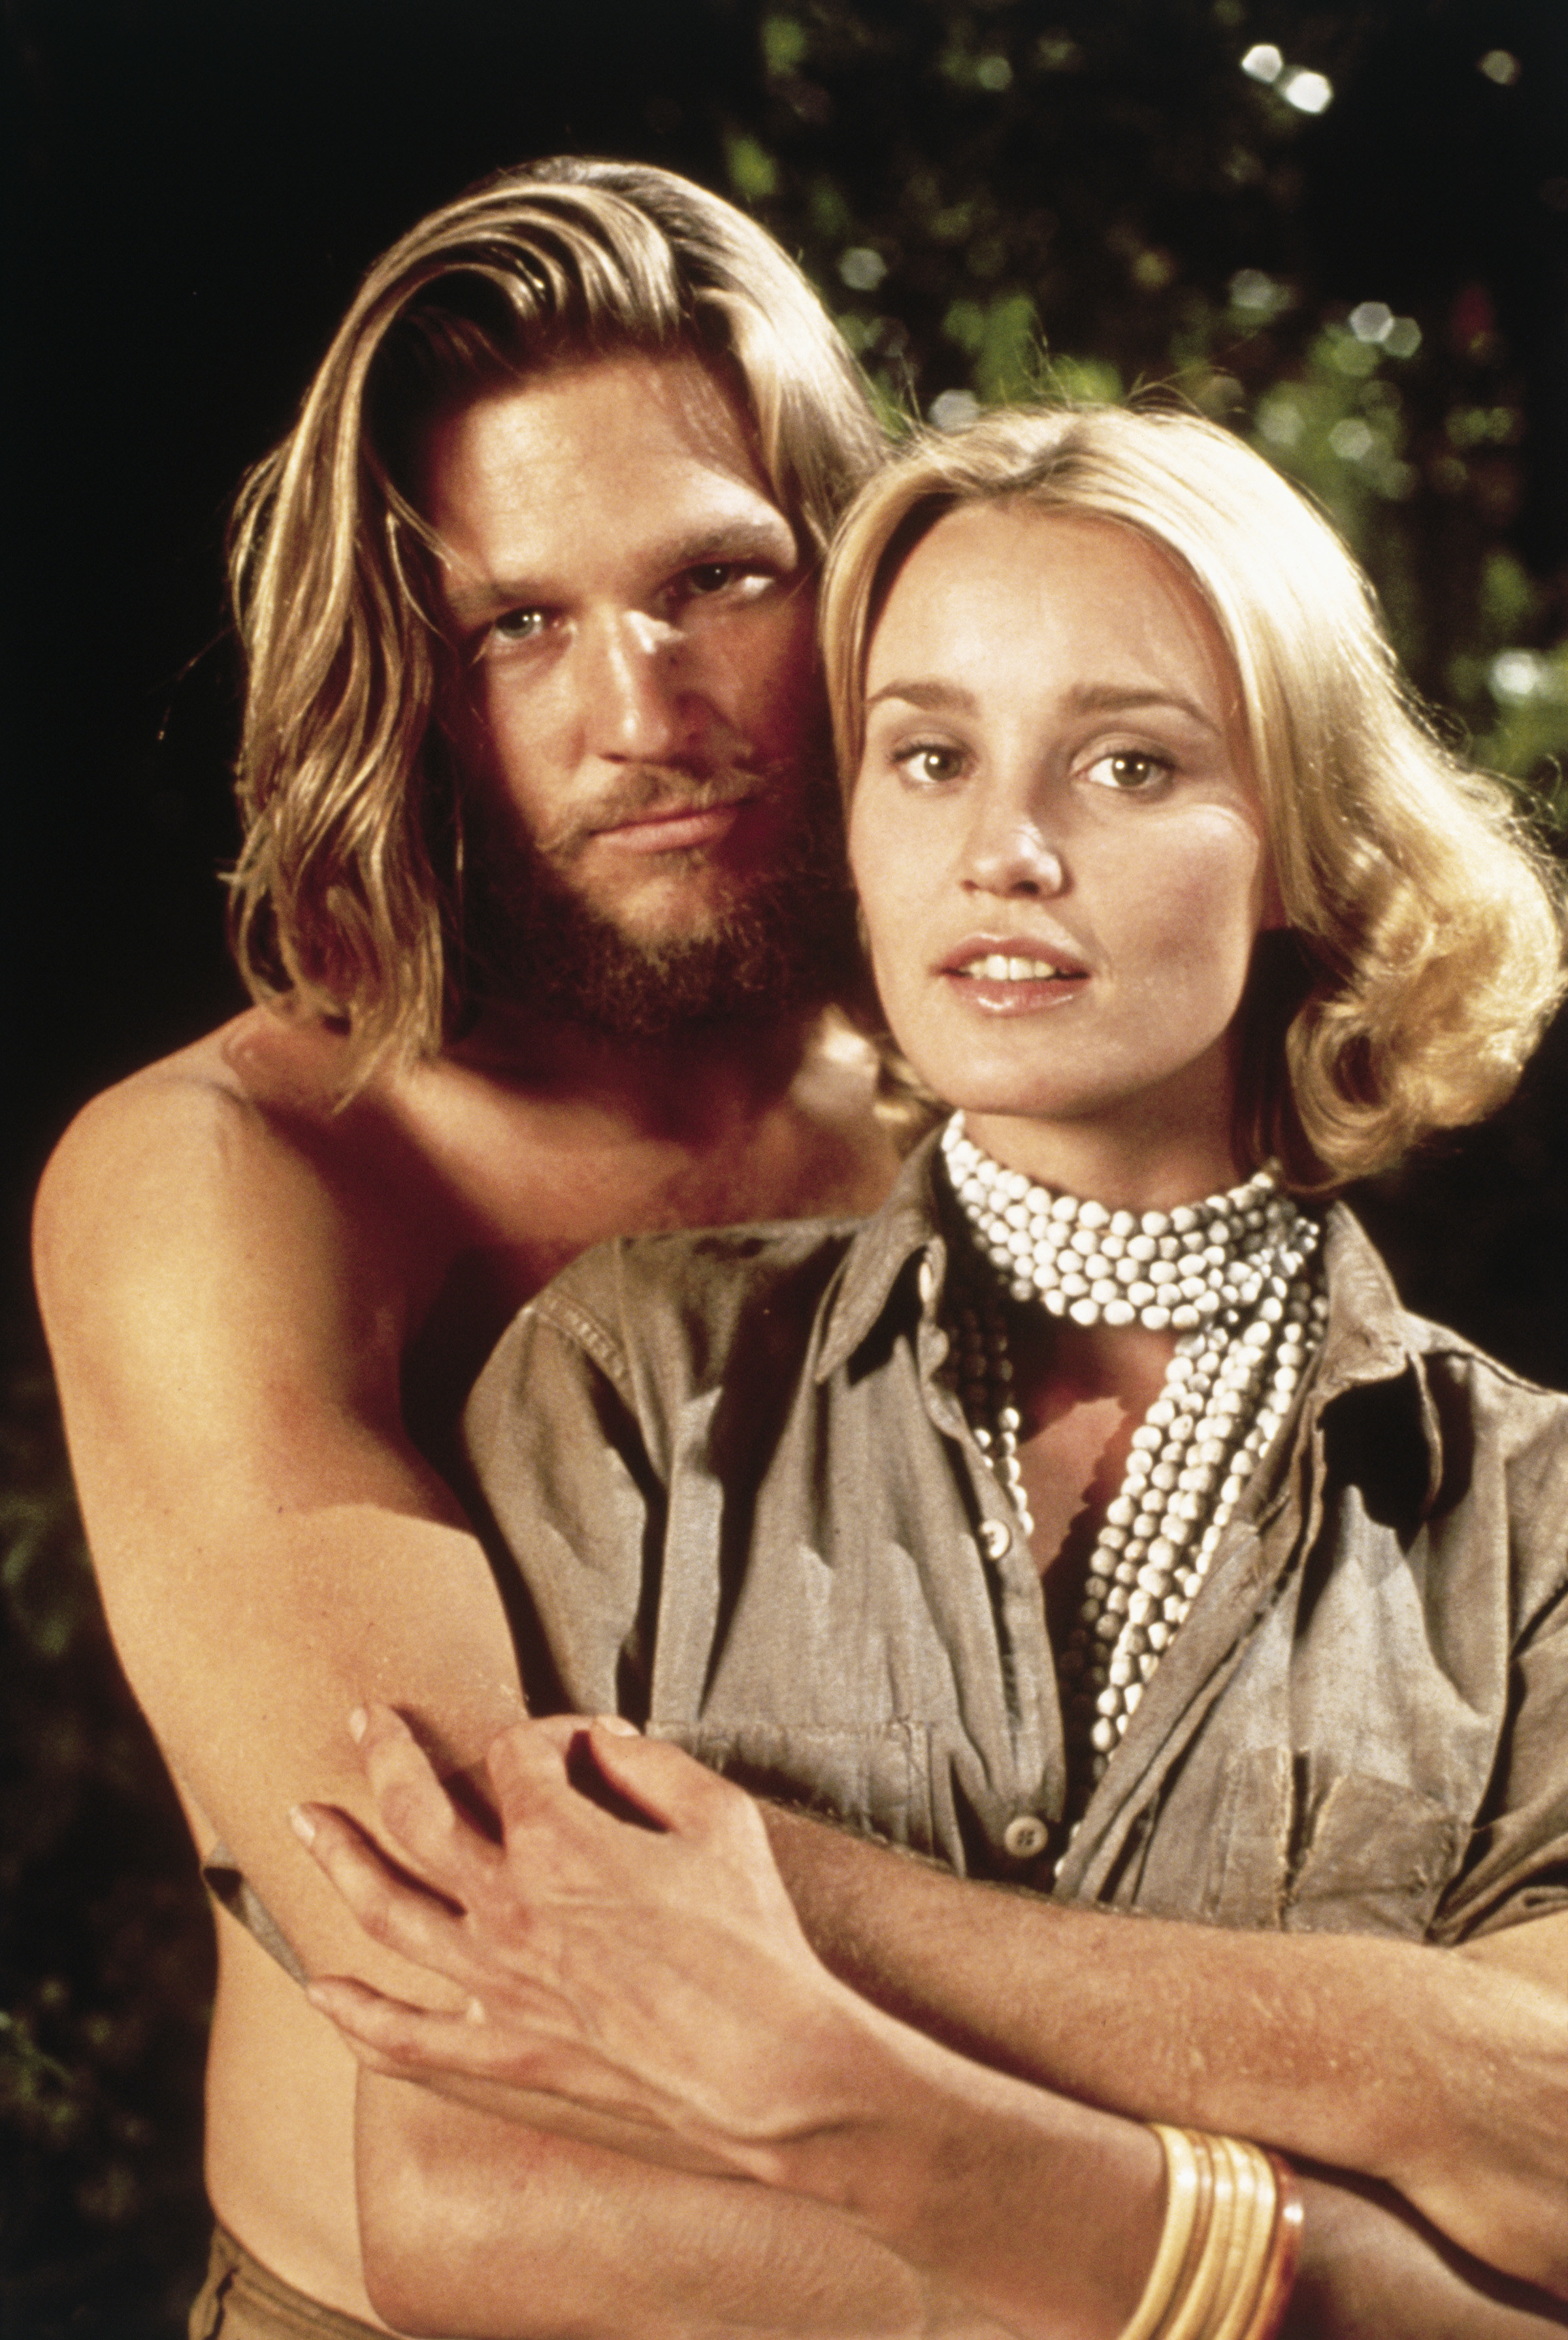 Jeff Bridges and Jessica embracing in the movie